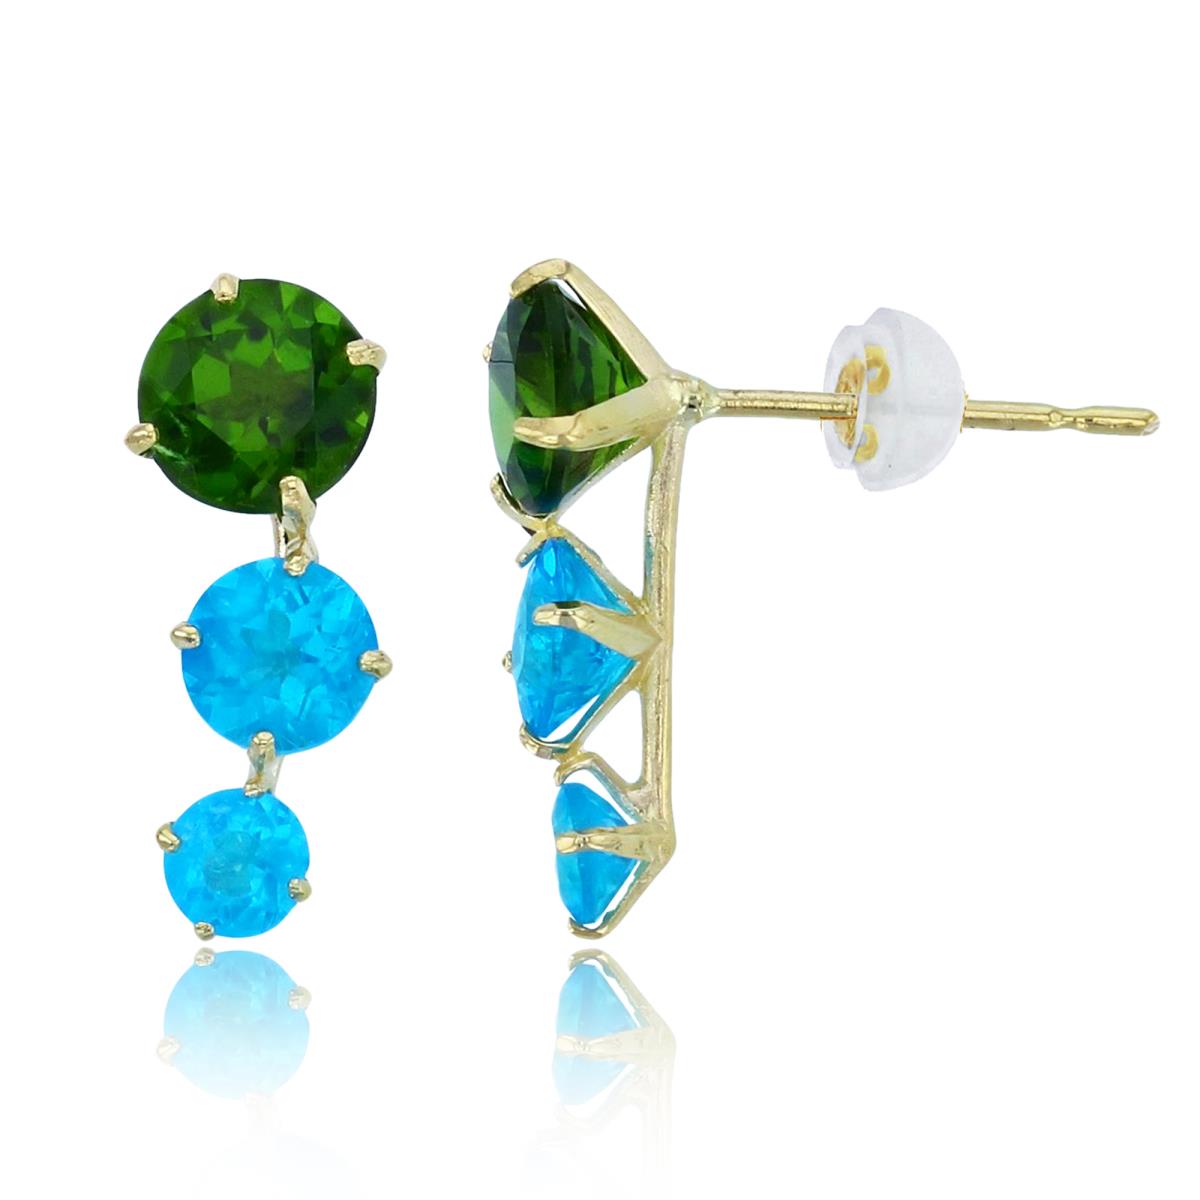 14K Yellow Gold Graduated Rnd Chrom Diopside & Blue Apatite Vertical Earrings with Silicon Backs